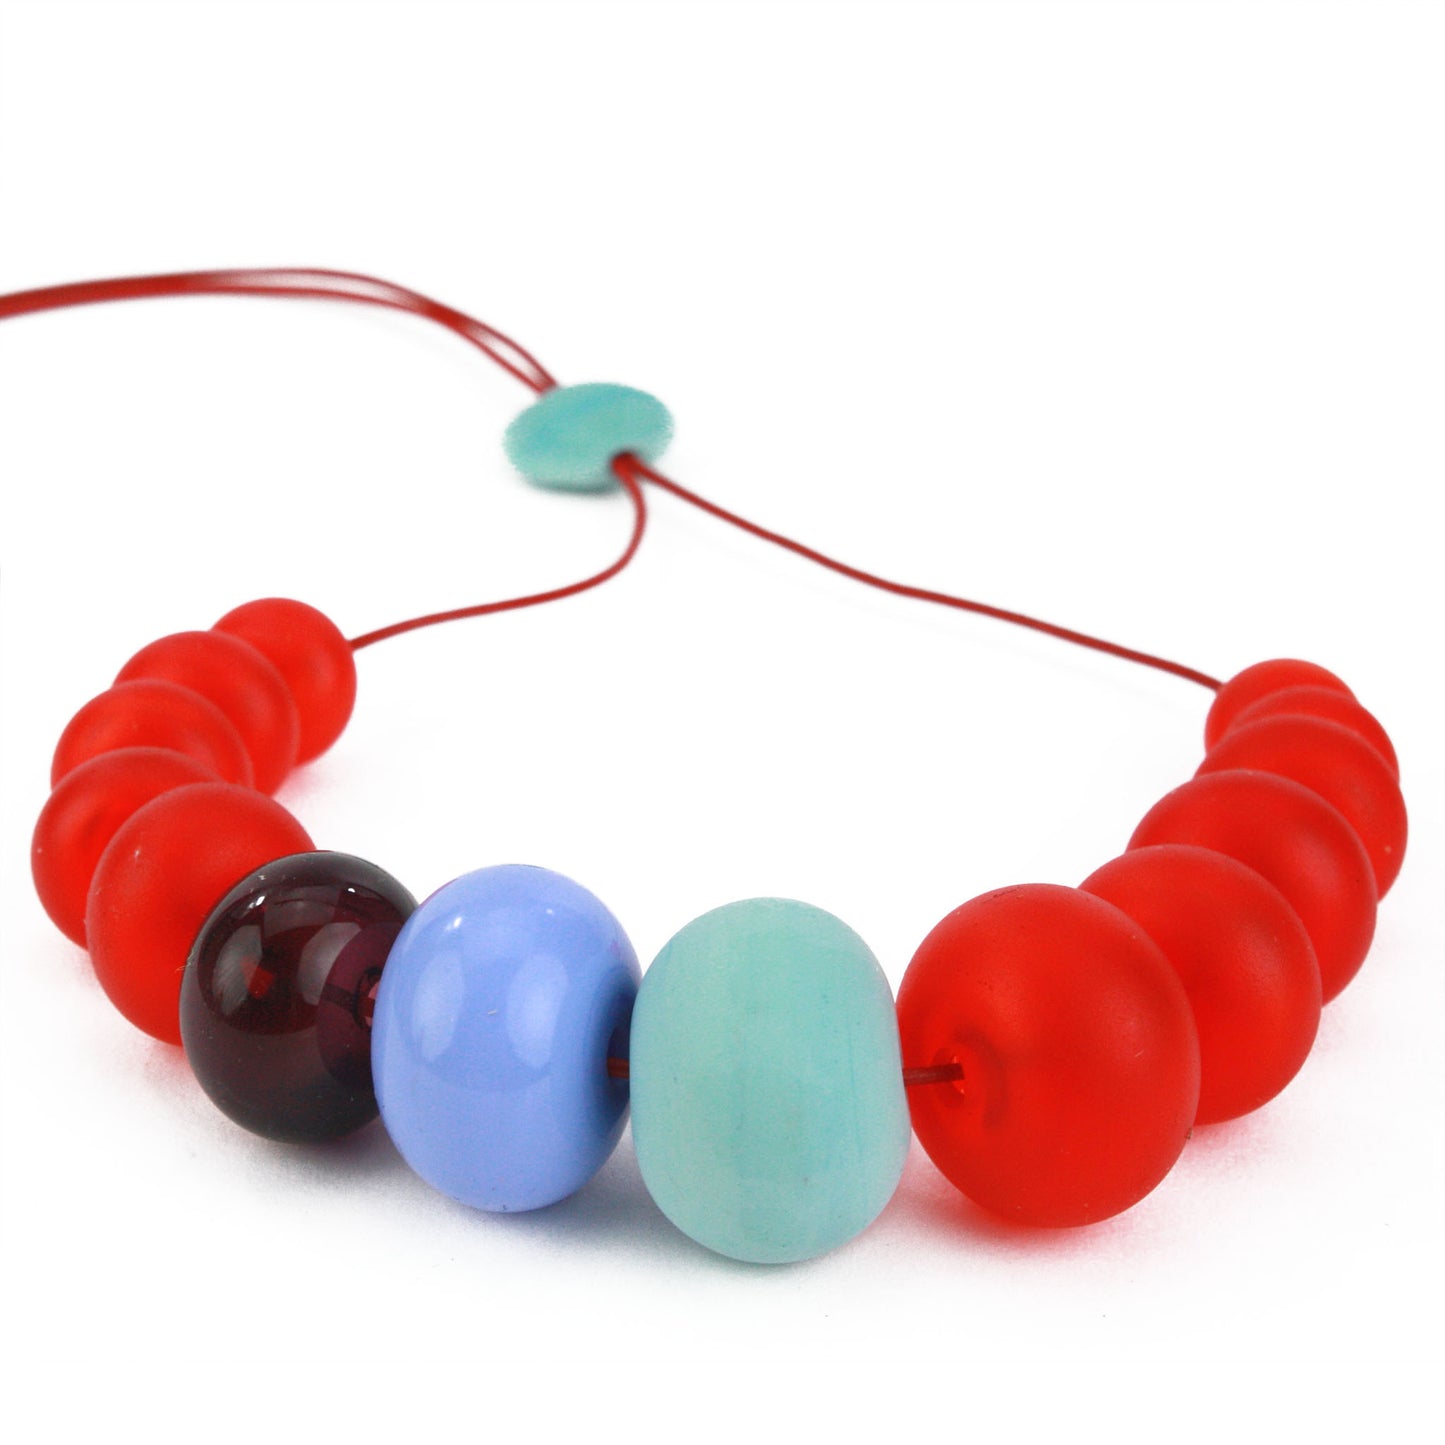 13 bead Bubble necklace - Red, turquoise and periwinkle